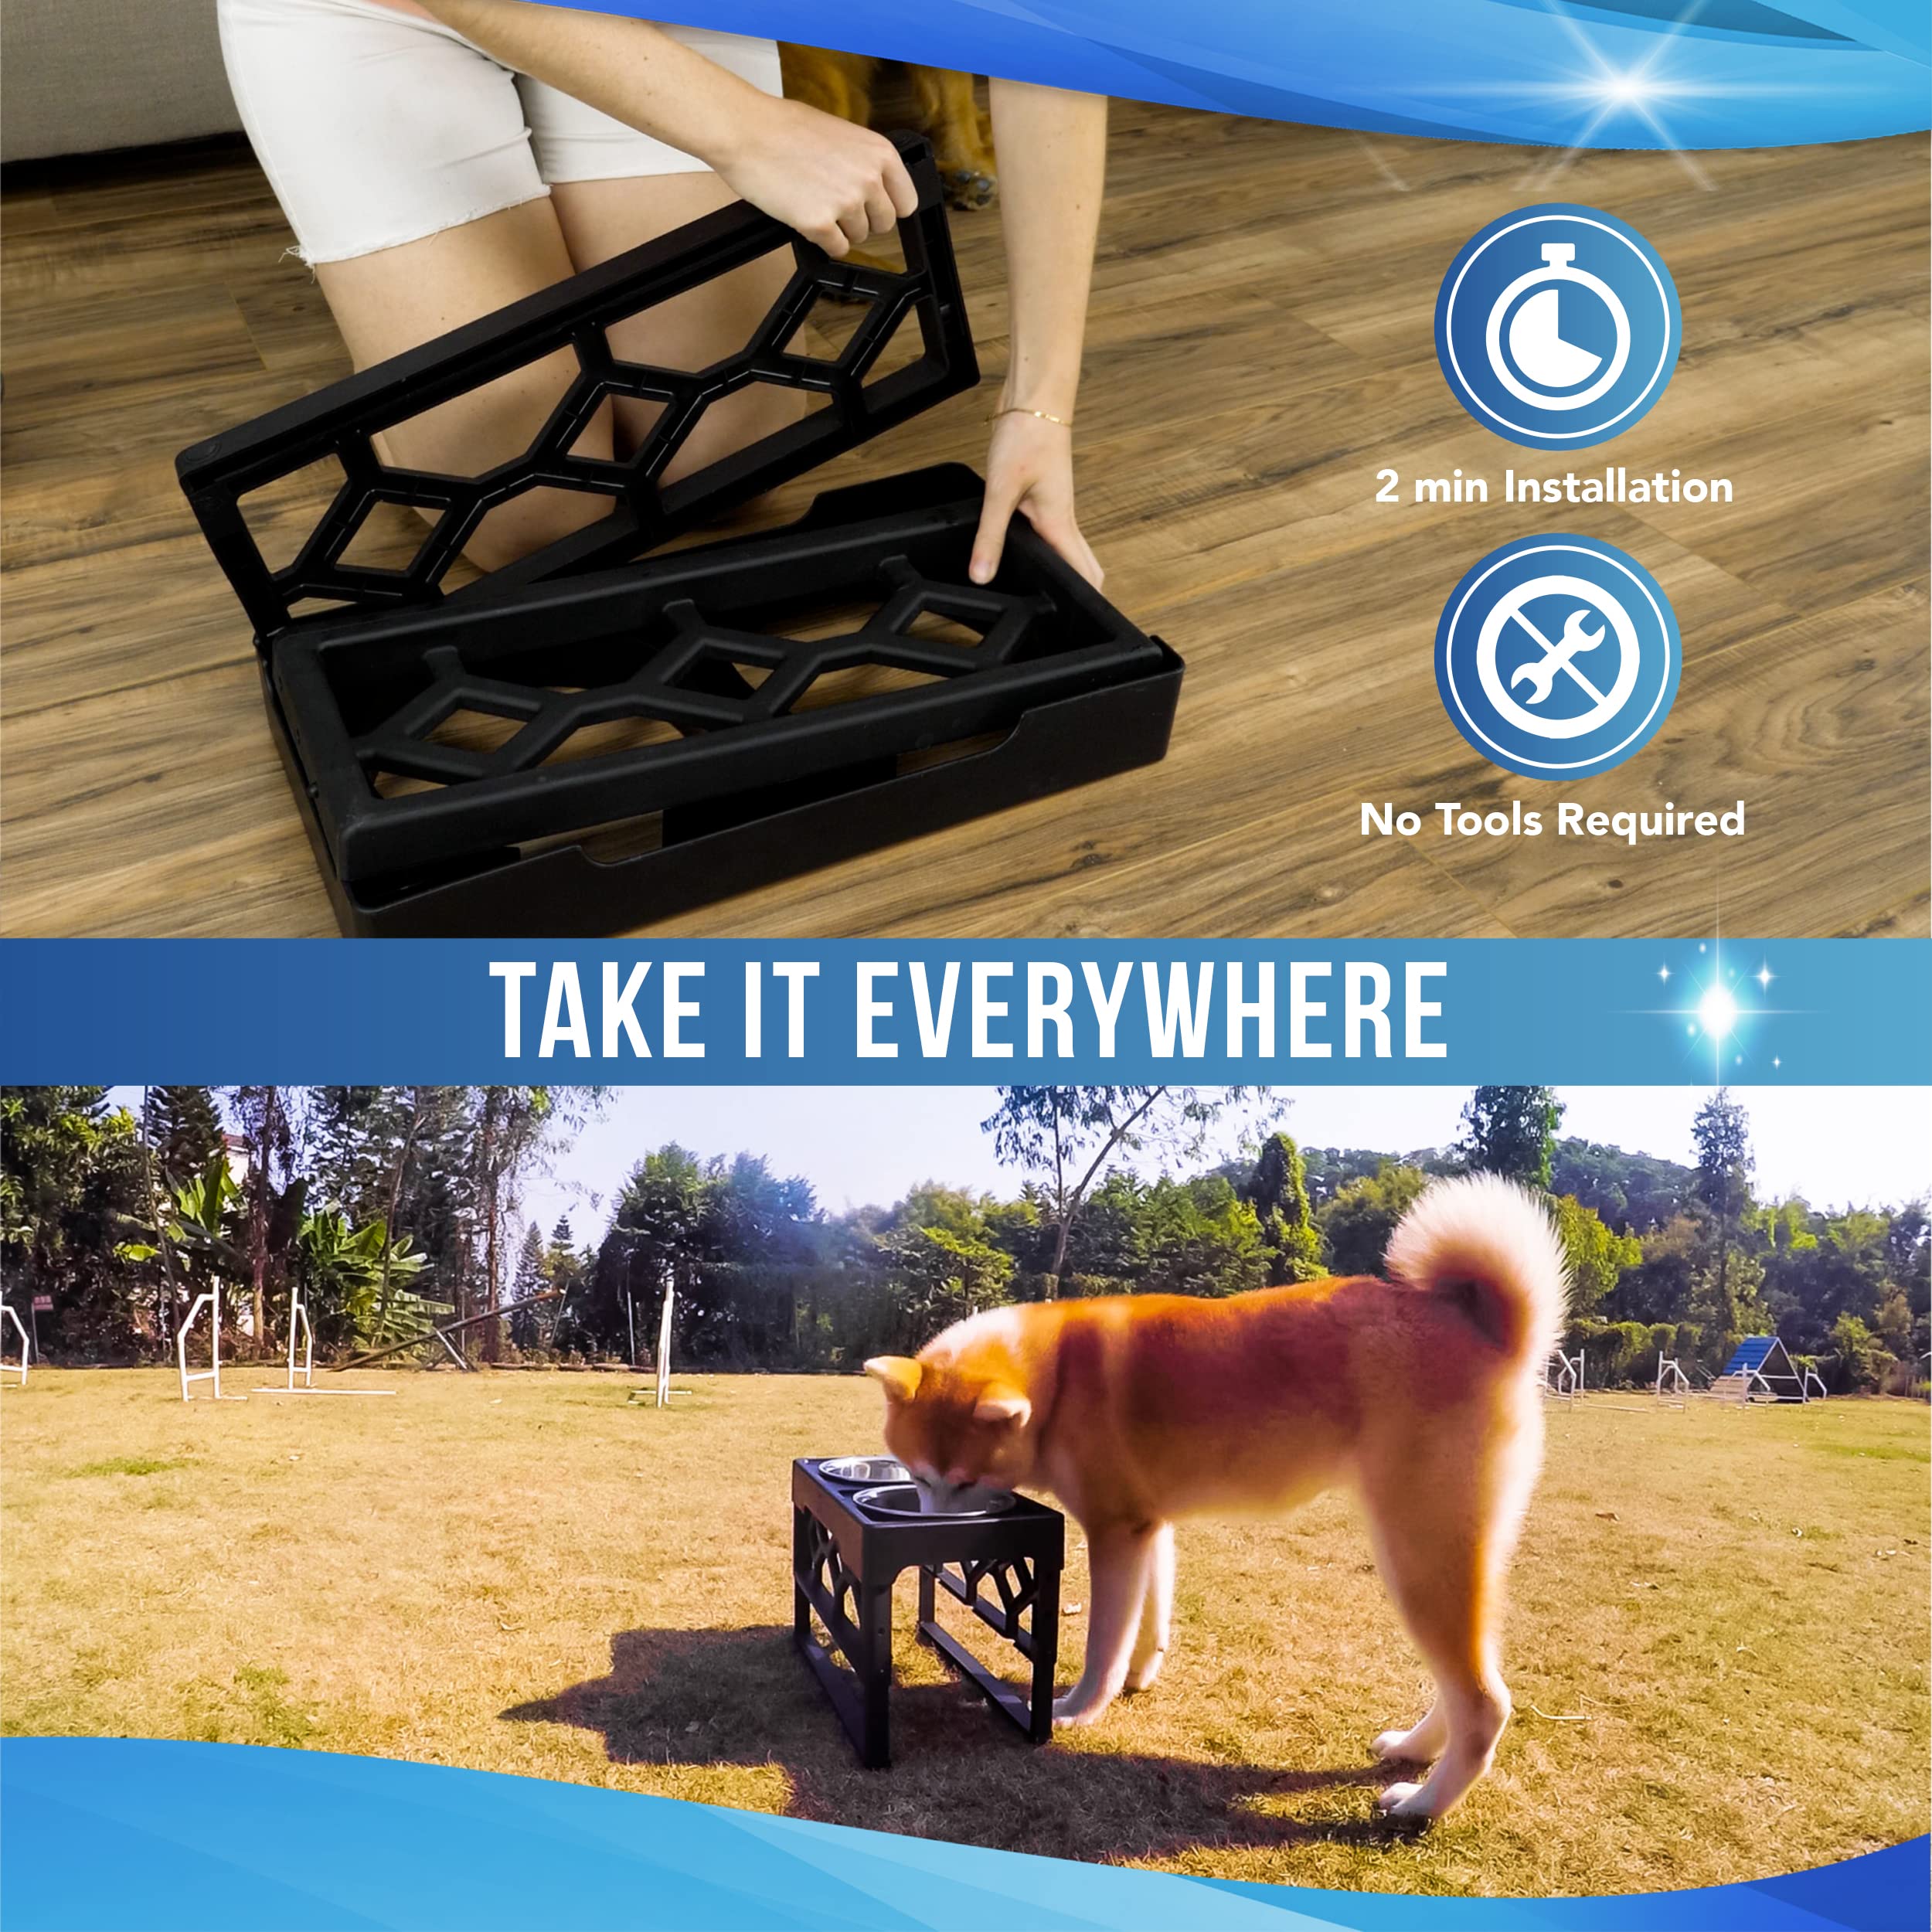 AveryDay Adjustable Elevated Dog Bowls- 4 Heights & 2 Stainless Steel Pet  Bowls – Your AveryDay®